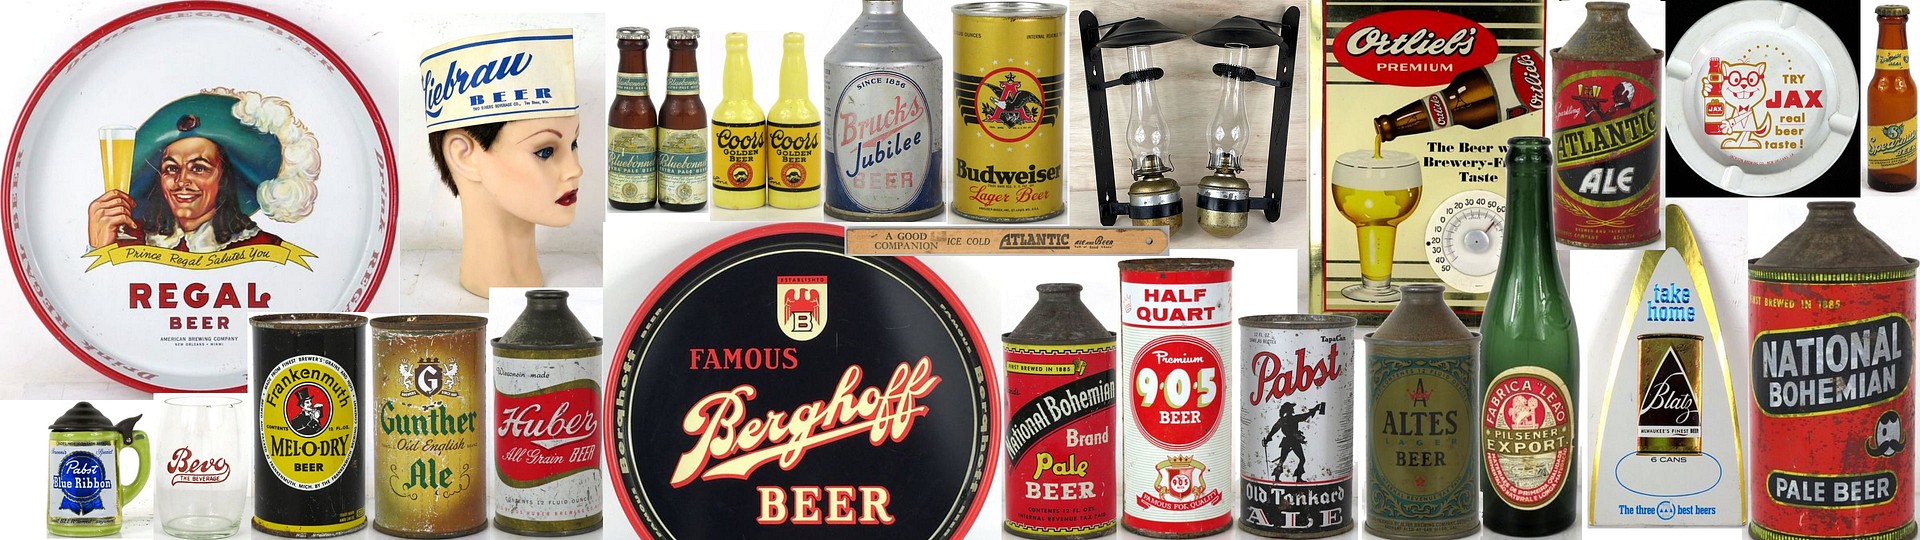 TavernTrove's April Beer Can and Breweriana Auction by TavernTrove